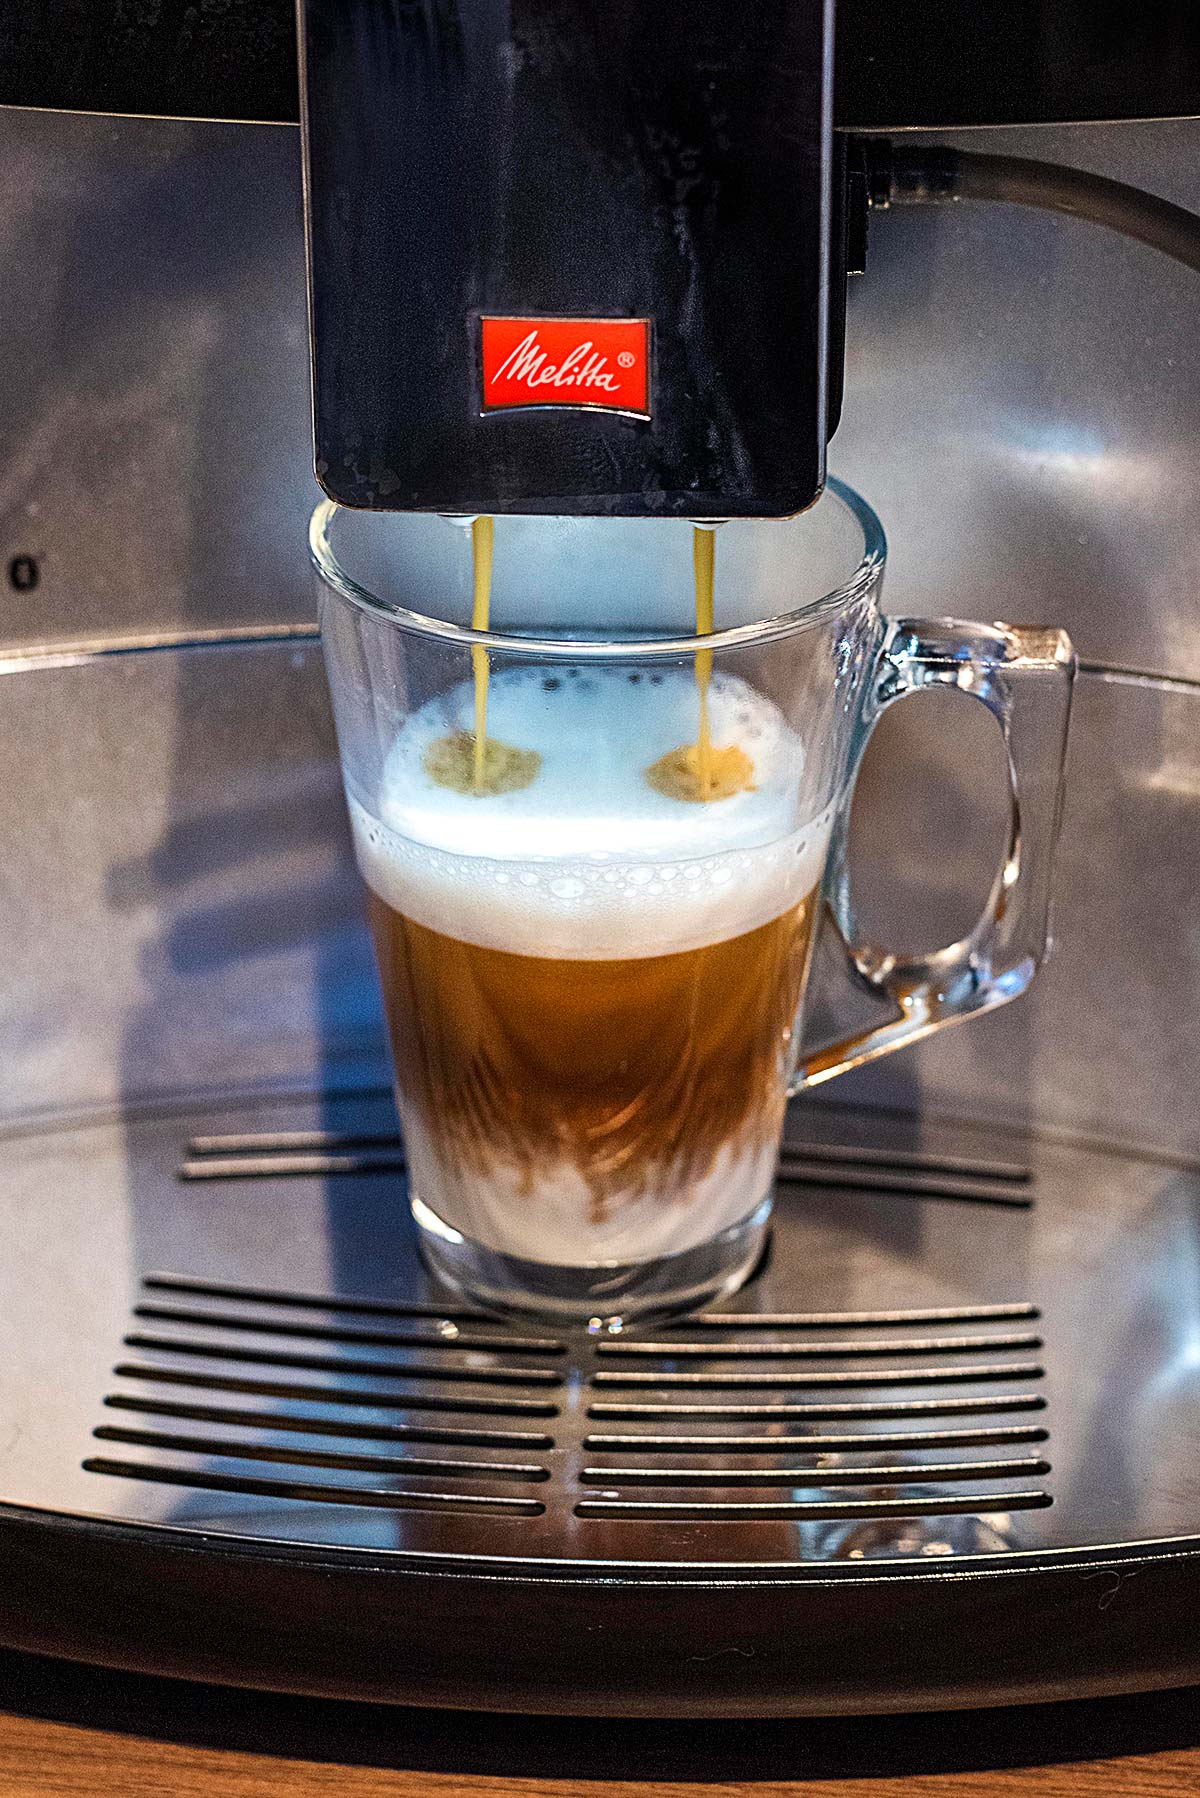 A latte glass being filled with coffee from a barista machine.